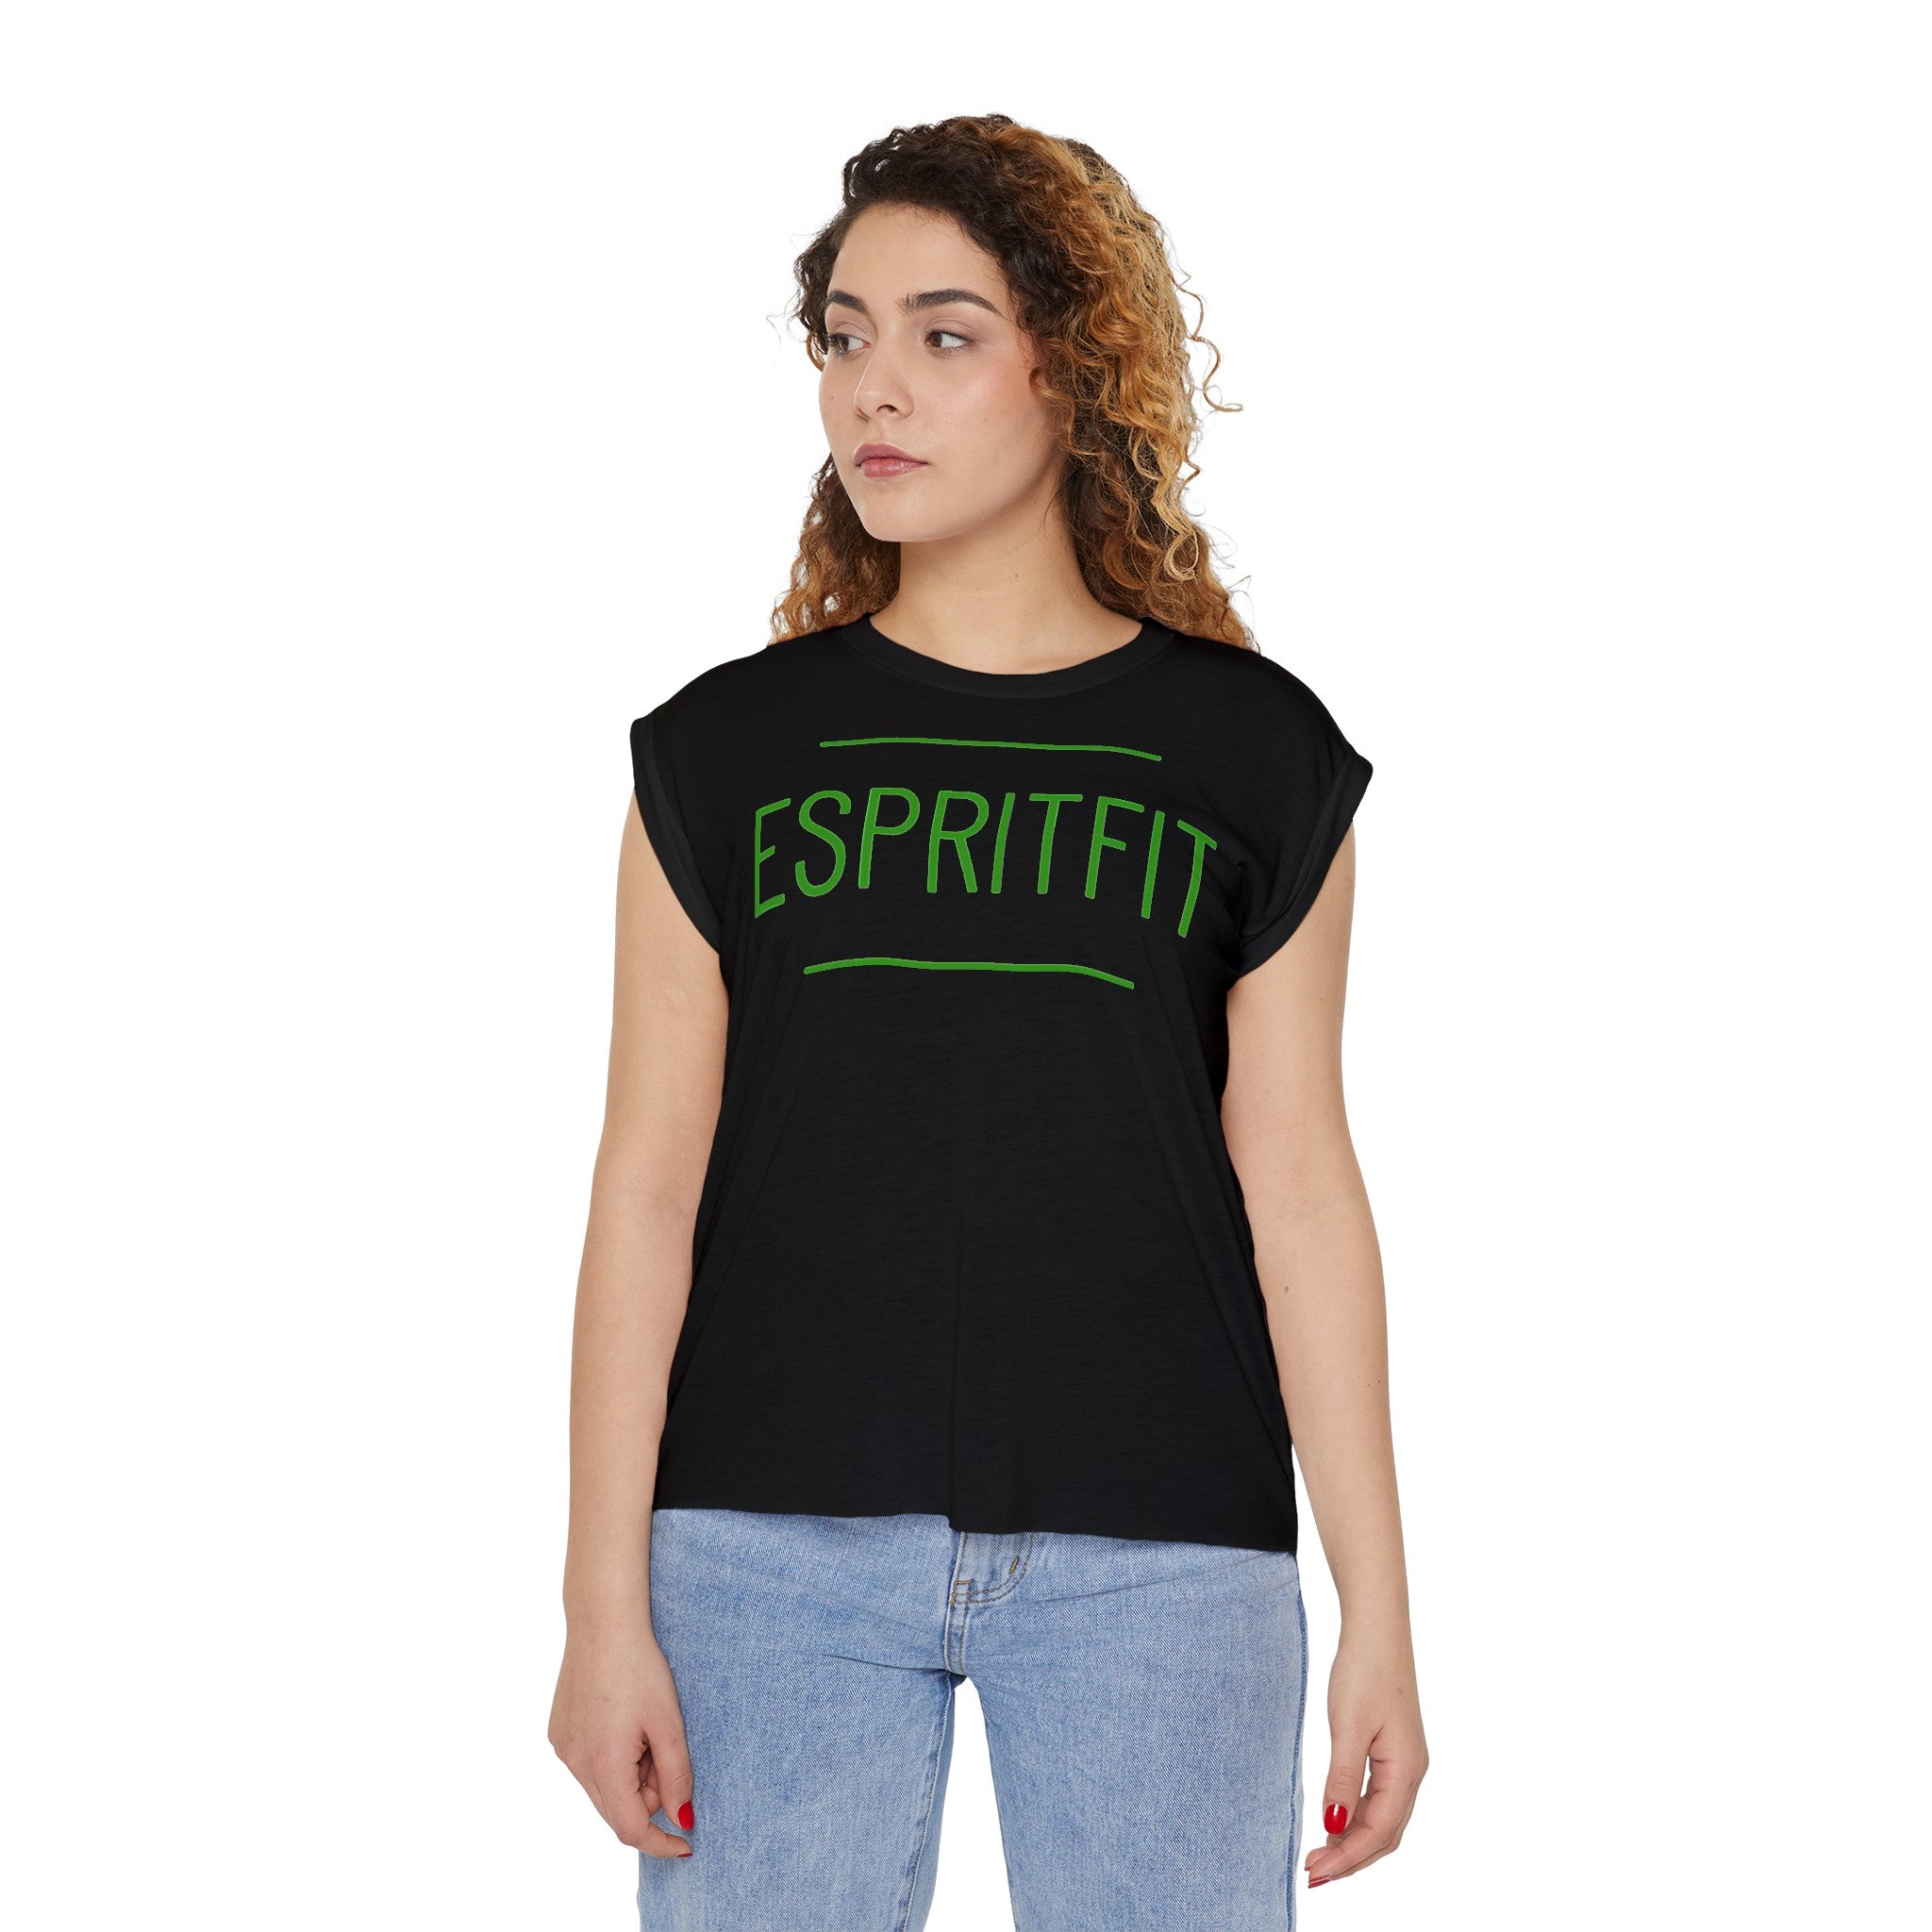 Espritfit Elevated Muscle Tee